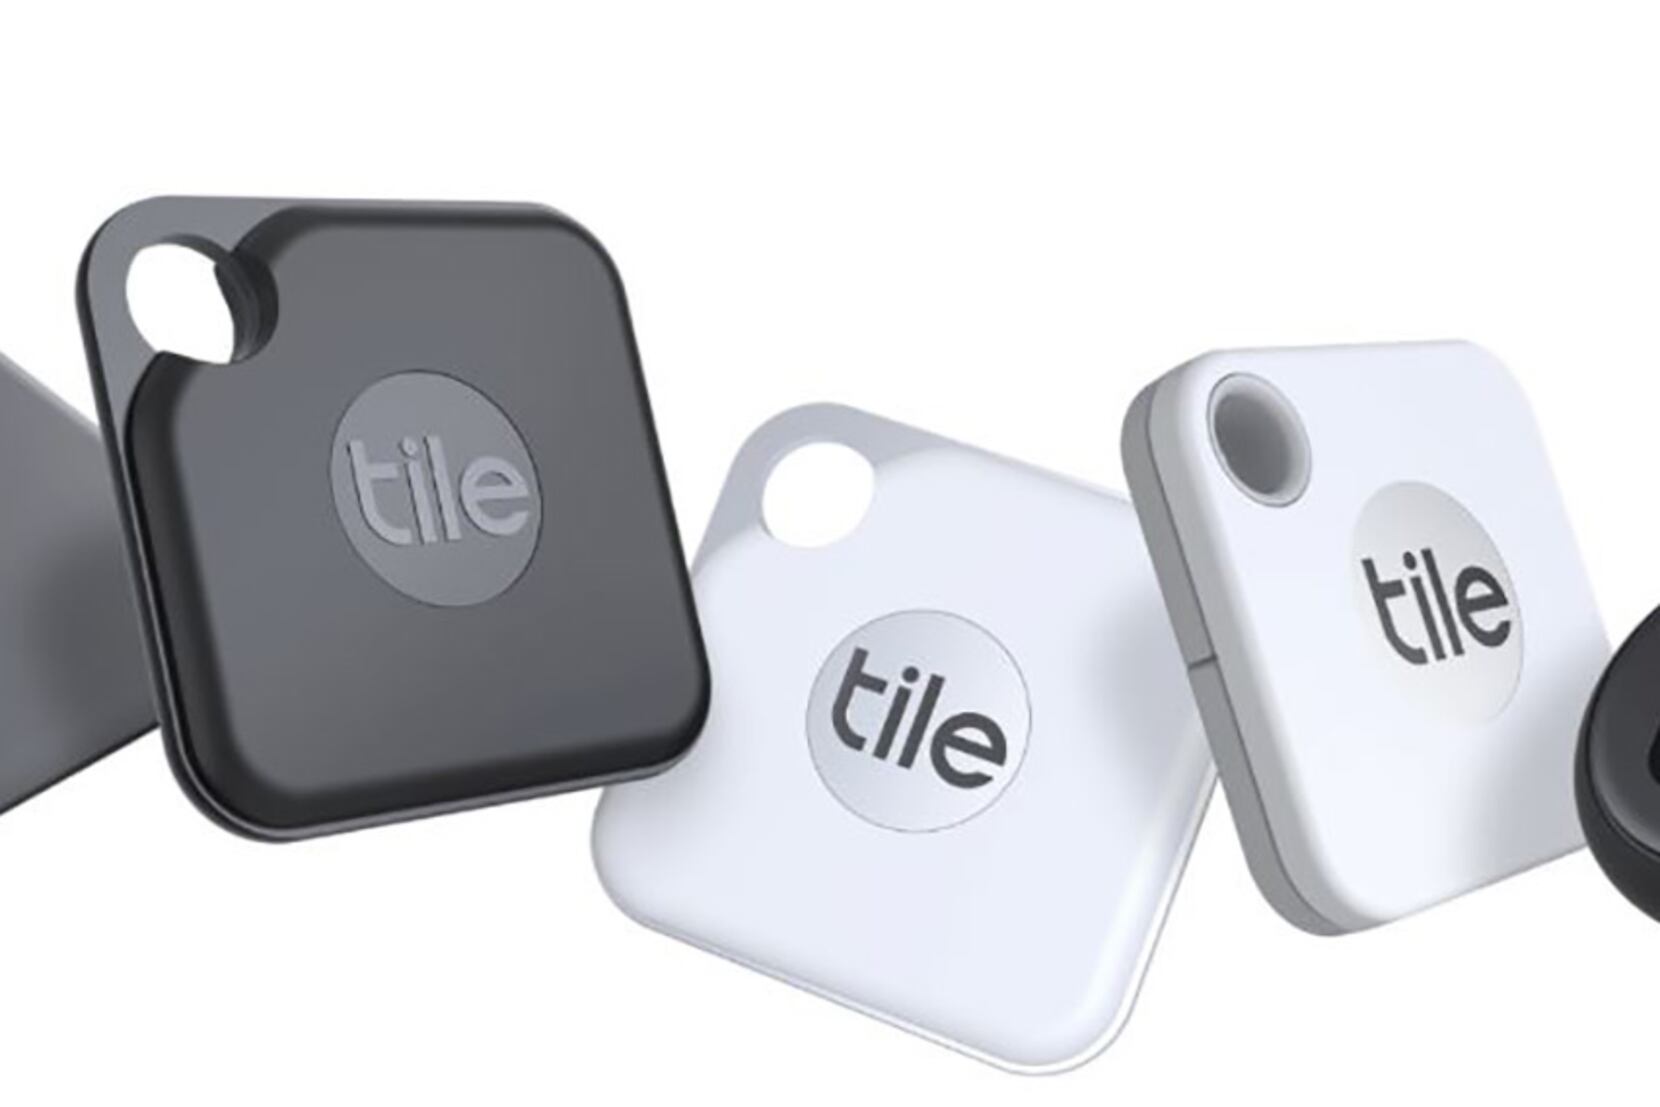 Tile Mate and Pro review: Replaceable batteries are a big improvement